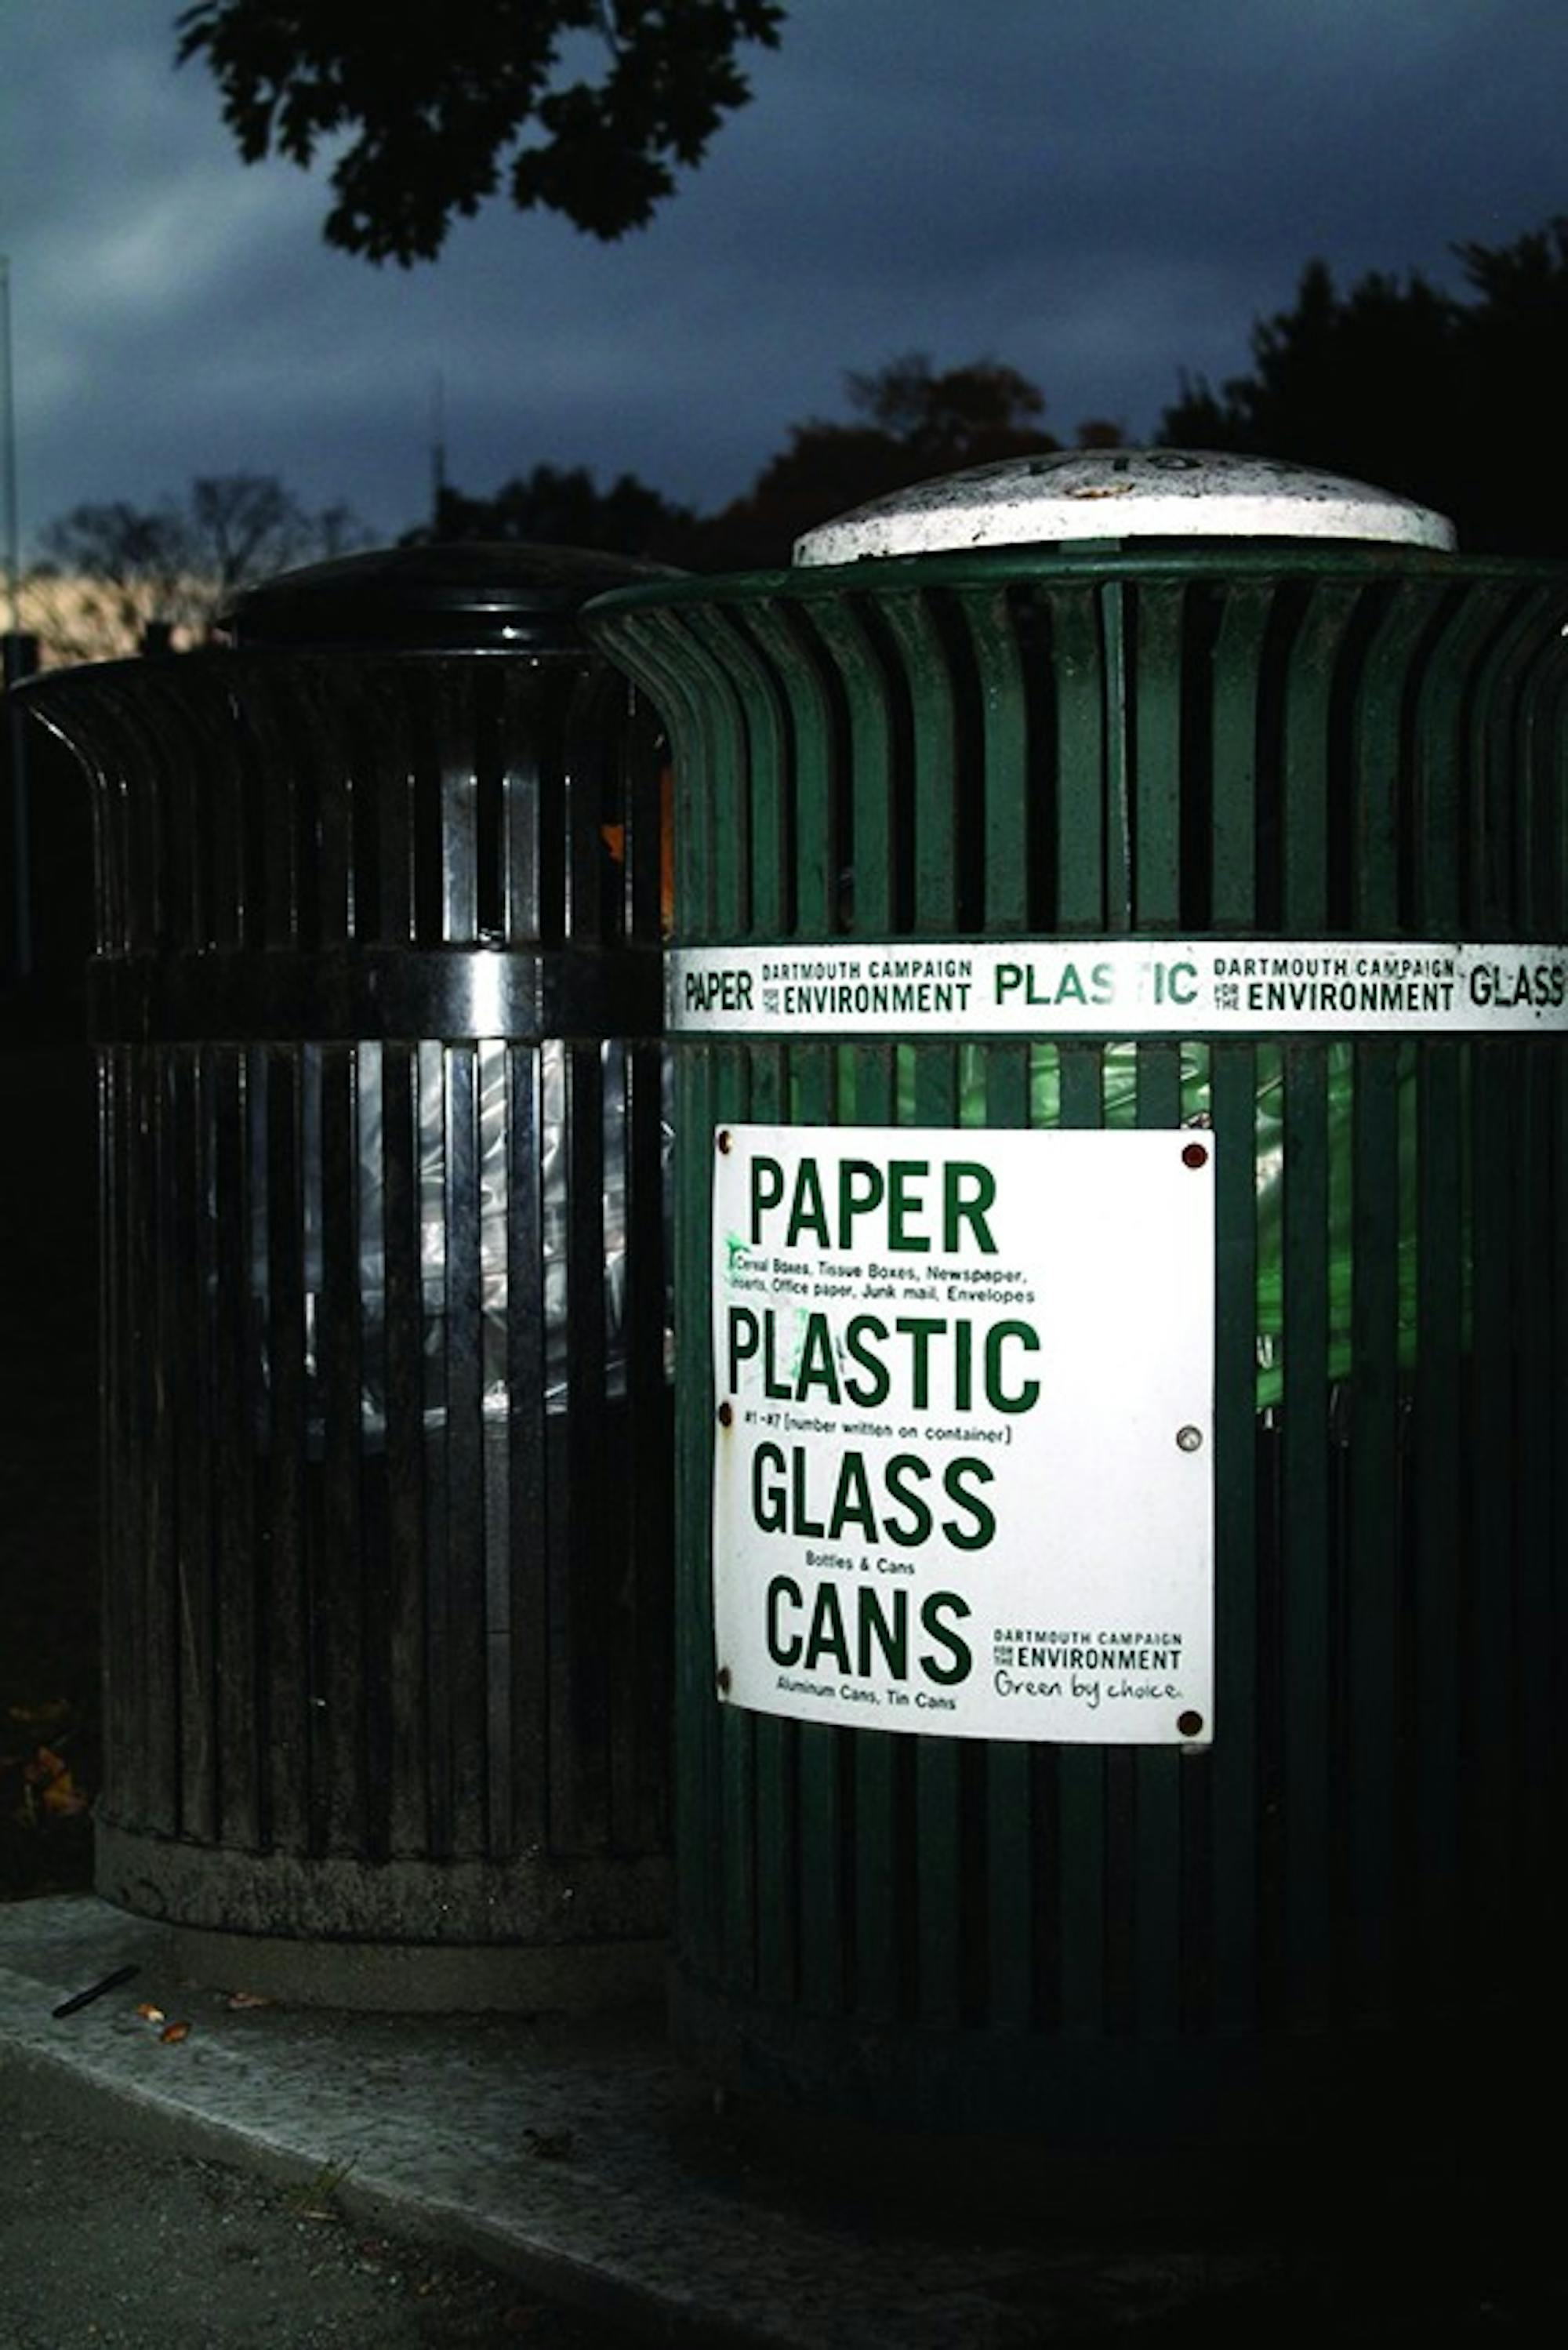 The College recently resumed recycling after waste contamination halted the effort.